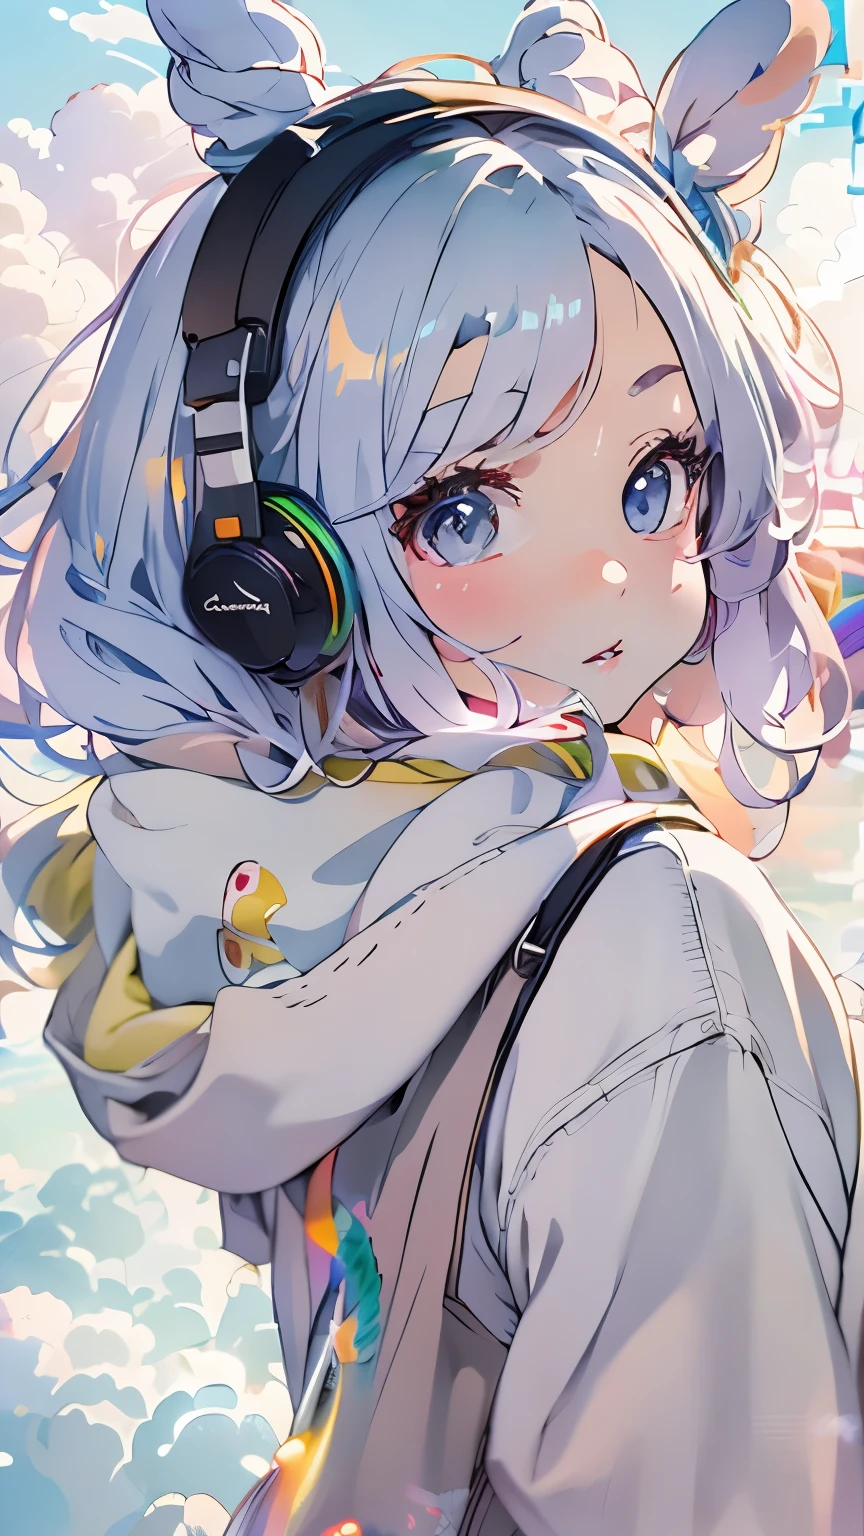 Wearing Sony headphones、headphones、one girl、Magical girl、perfect anatomy、small face、plump lips、look of suspicion、topknot、Modern hoodies、knee socks、(((The background is pastel colored clouds:1.5、rainbow、blurred background)))、highest quality、High resolution、High resolution、cinematic lighting、professional photographer